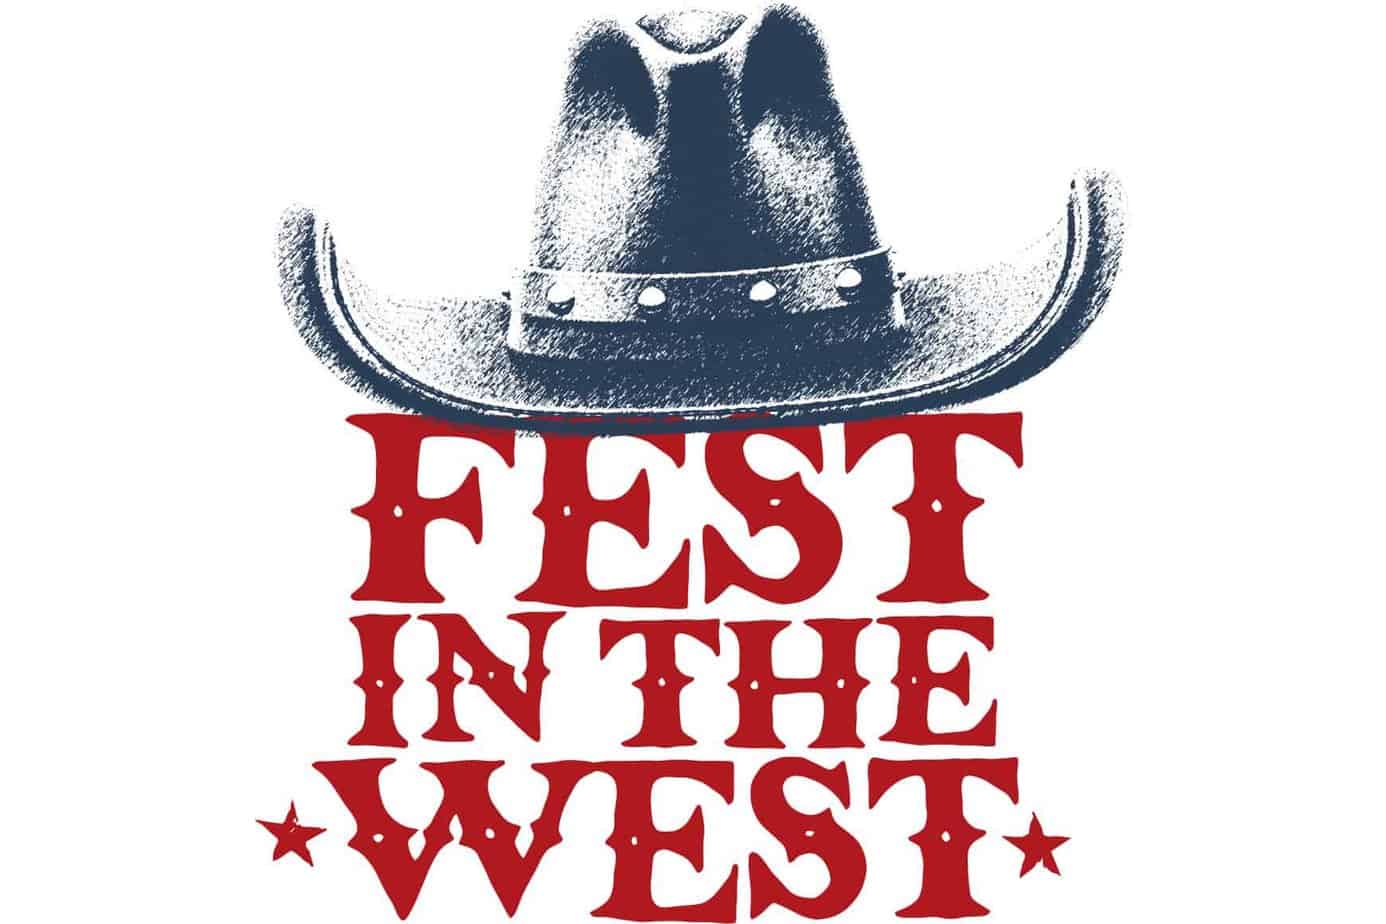 Fest in West - Western Cary's Signature Festival - May 6 - on the